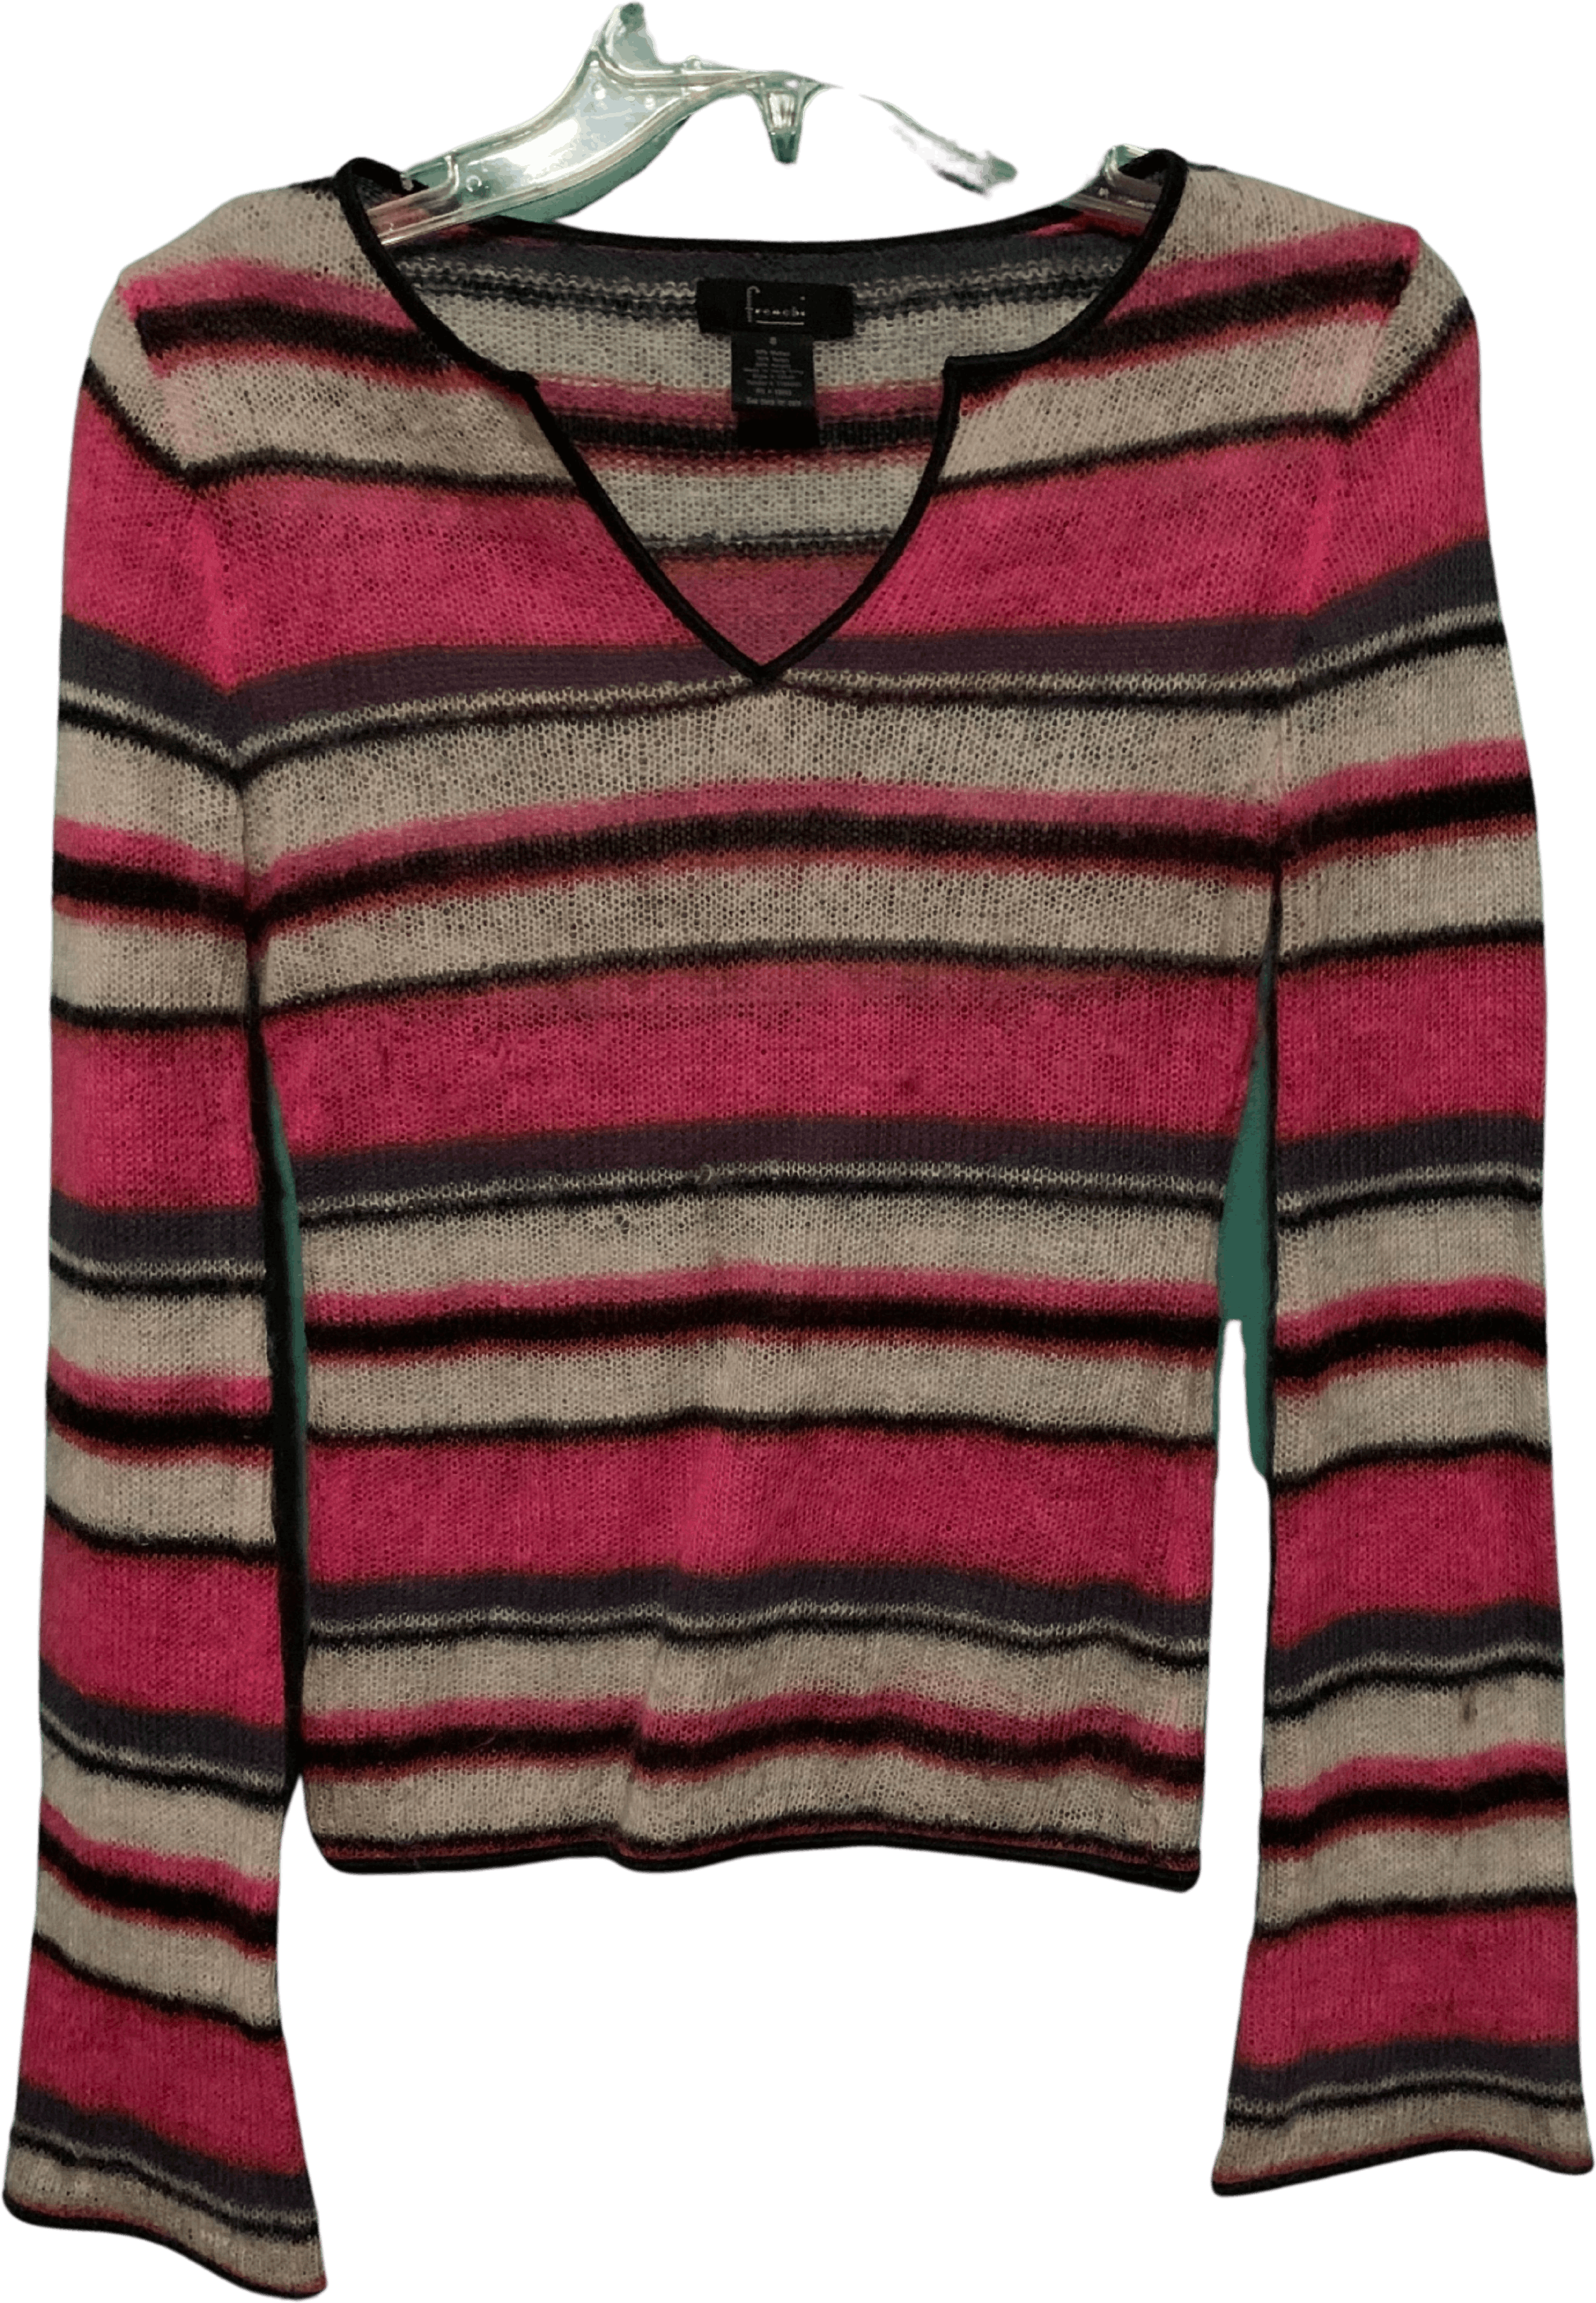 Vintage 90's Striped Mohair Sweater | Shop THRILLING